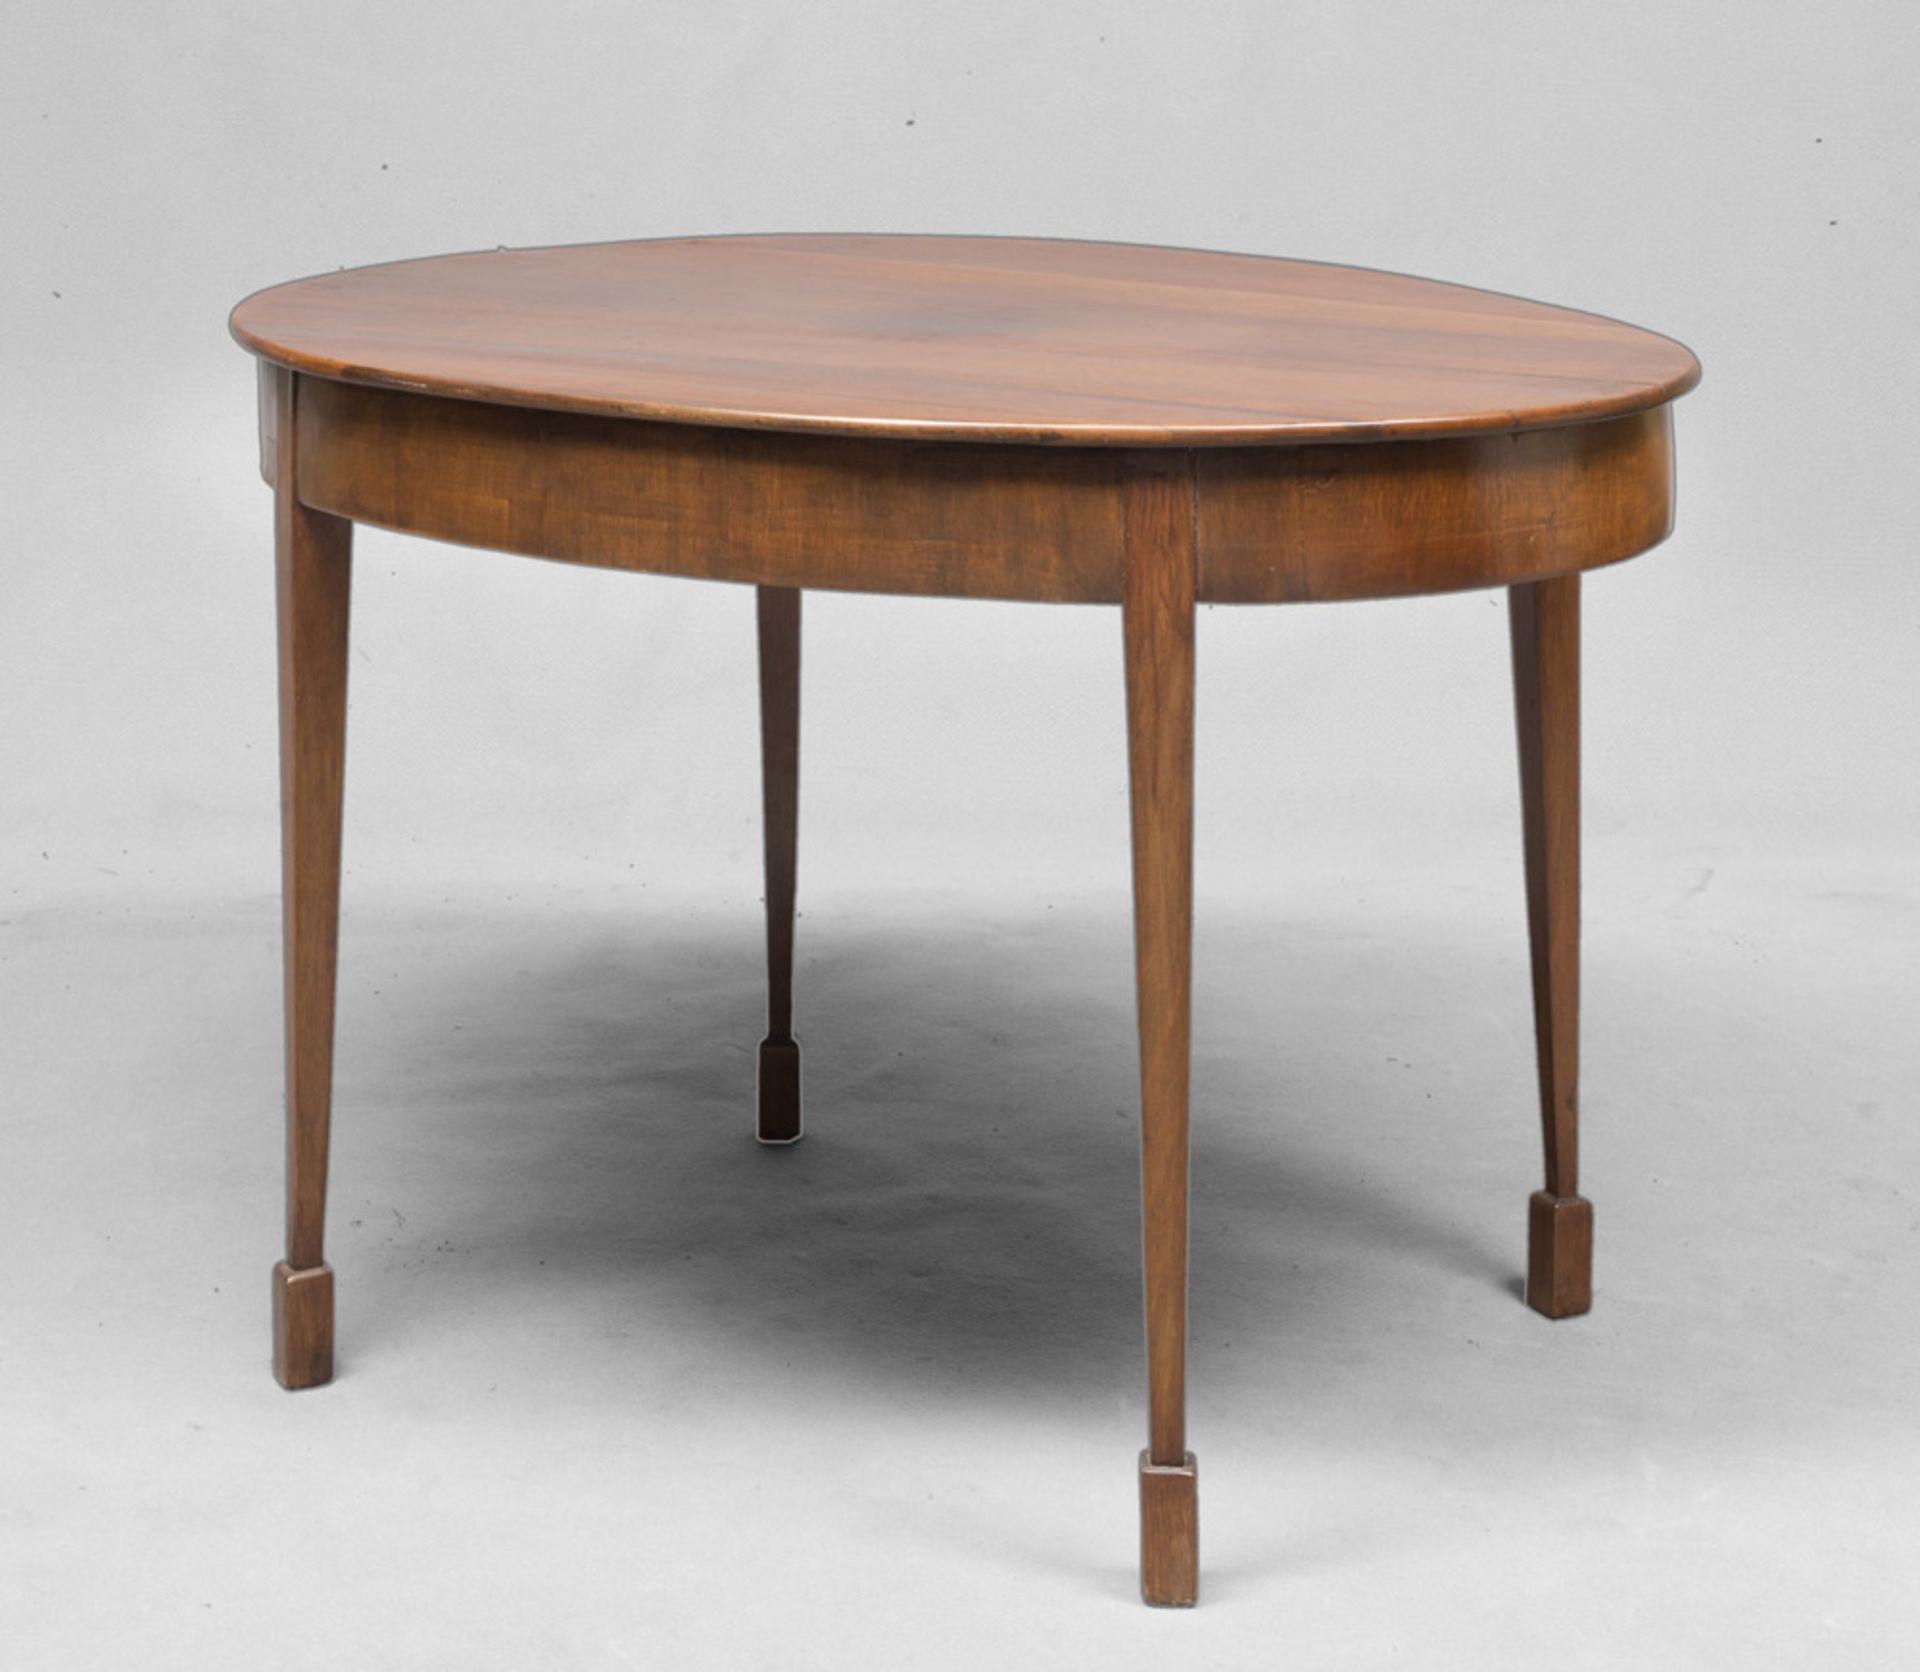 A BEAUTIFUL MAHOGANY TABLE, FRANCE FIRST HALF 19th SECOLO Measures cm. 75 x 110 x 83.BEL TAVOLO IN